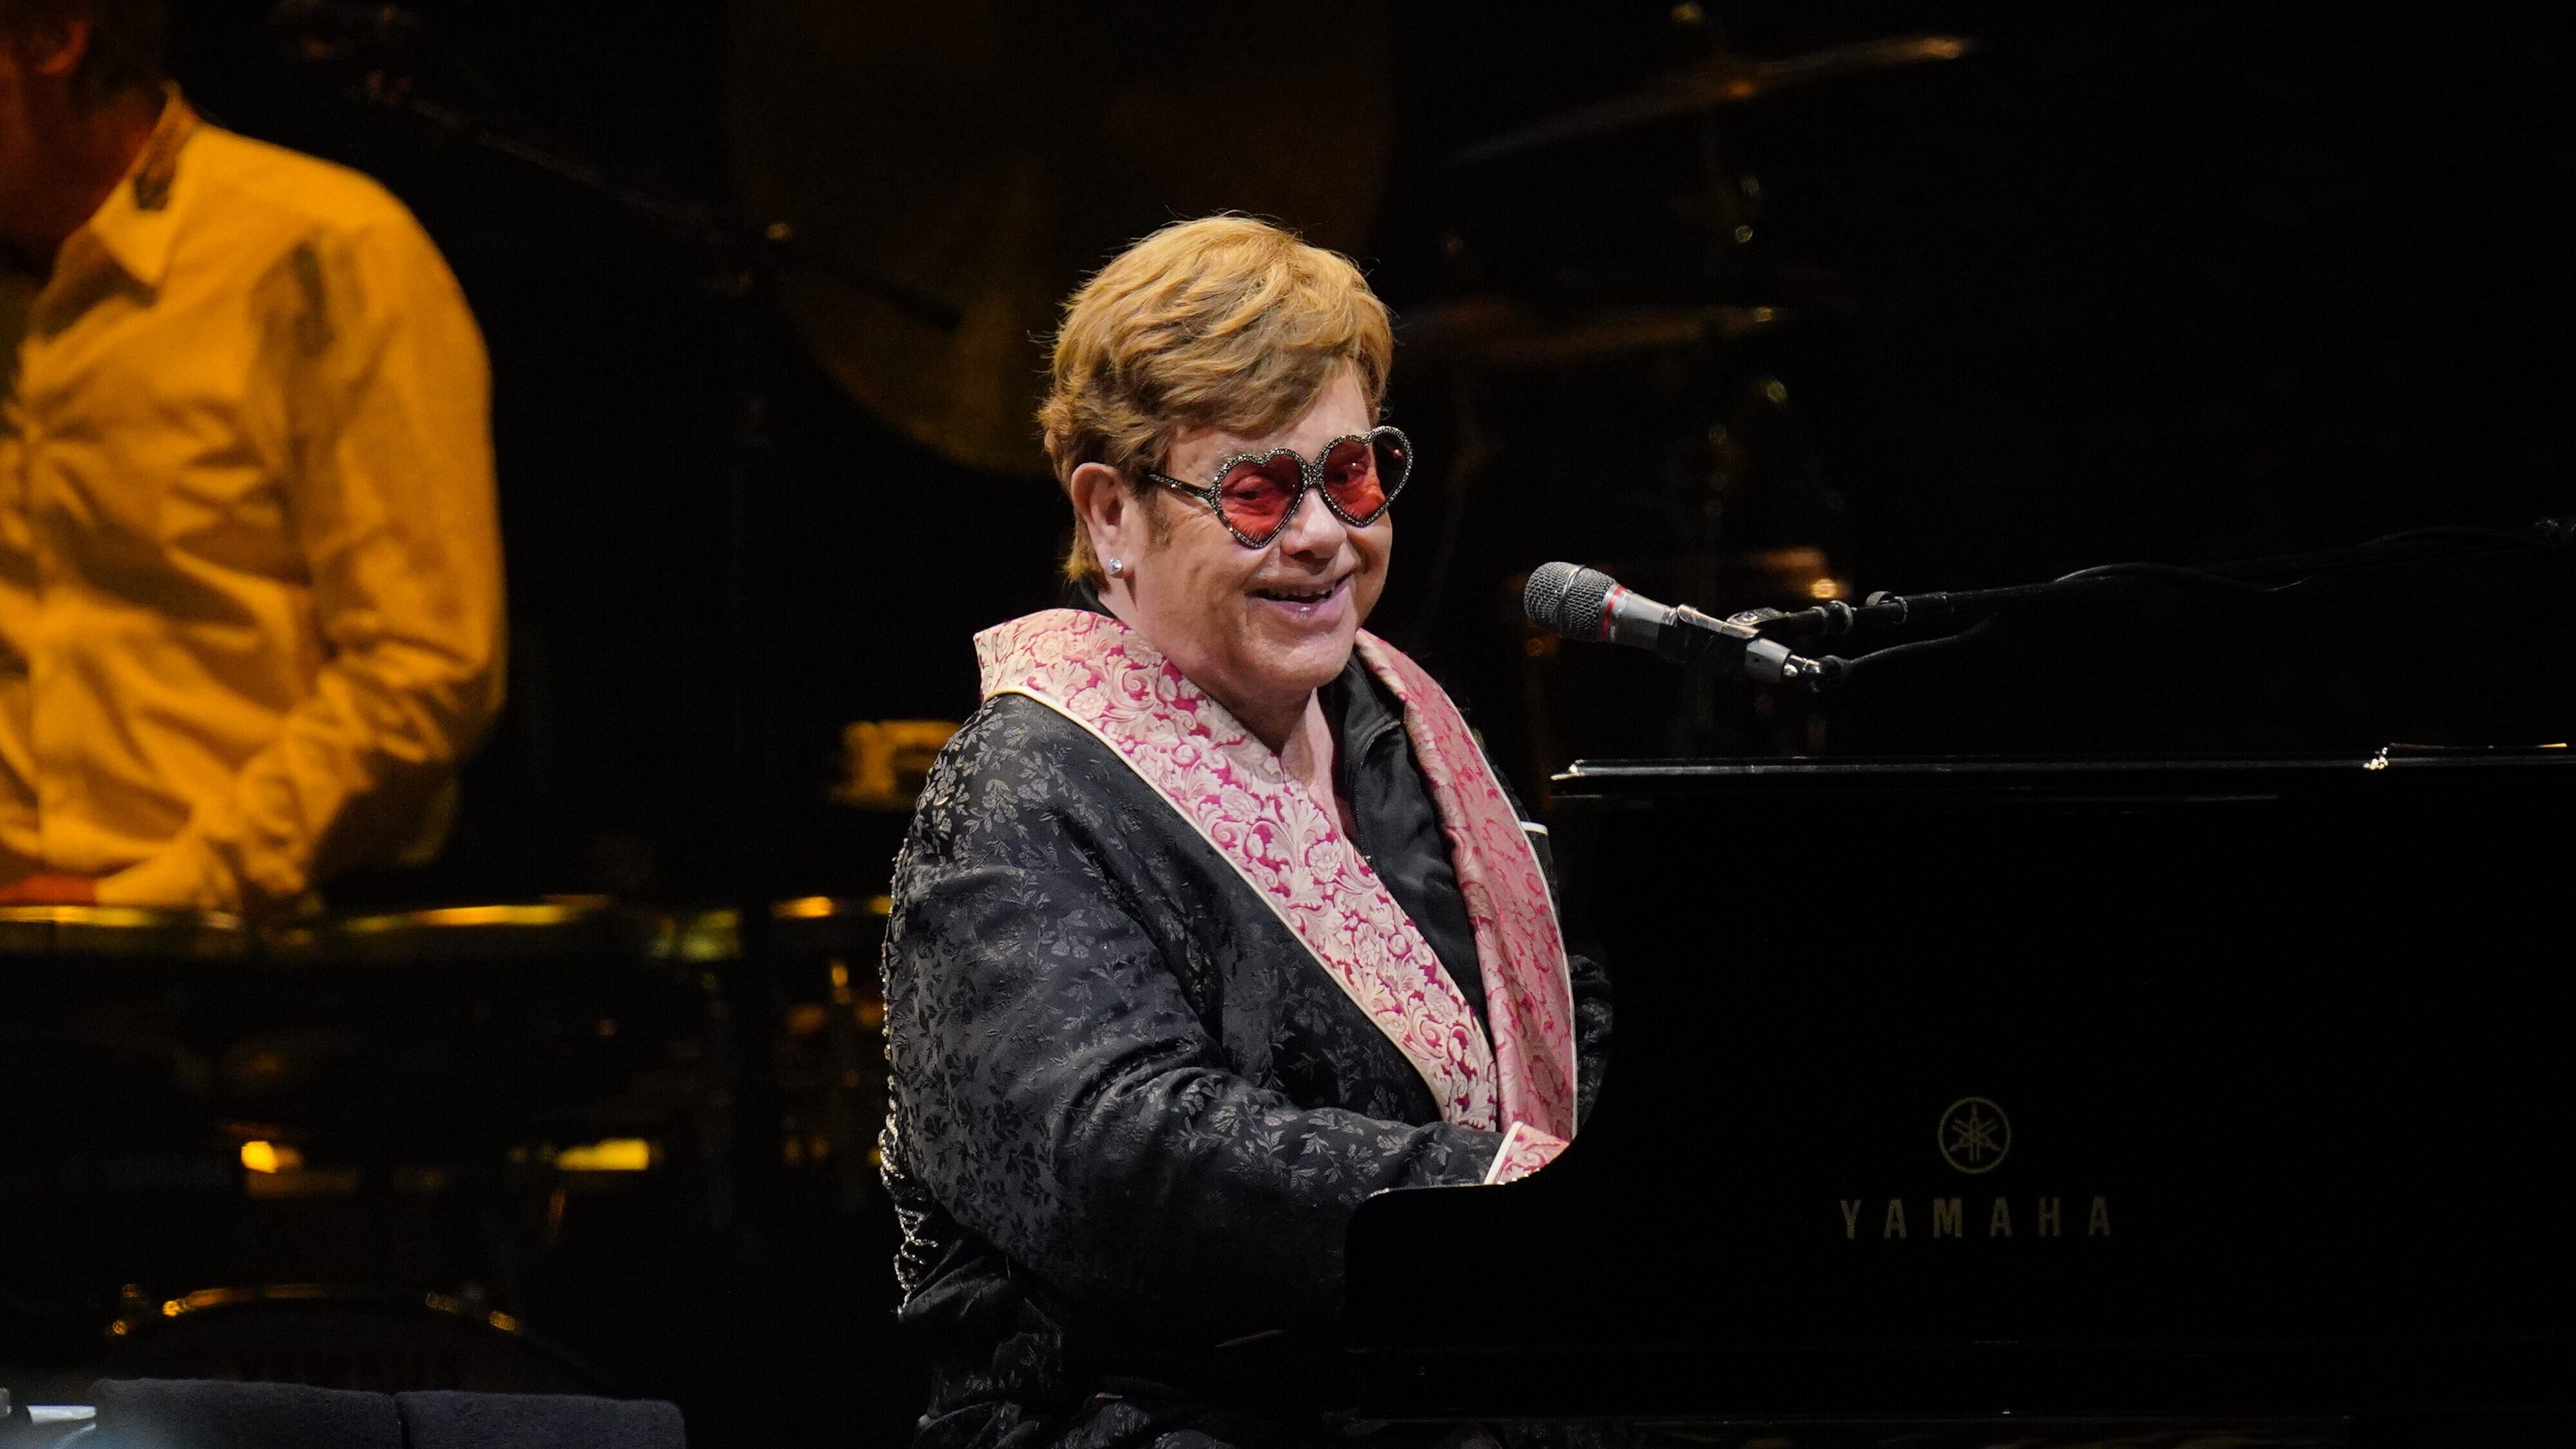 Sir Elton John performs on stage during his Farewell Yellow Brick Road show at the Tele2 Arena in Stockholm, Sweden (Yui Mok/PA)